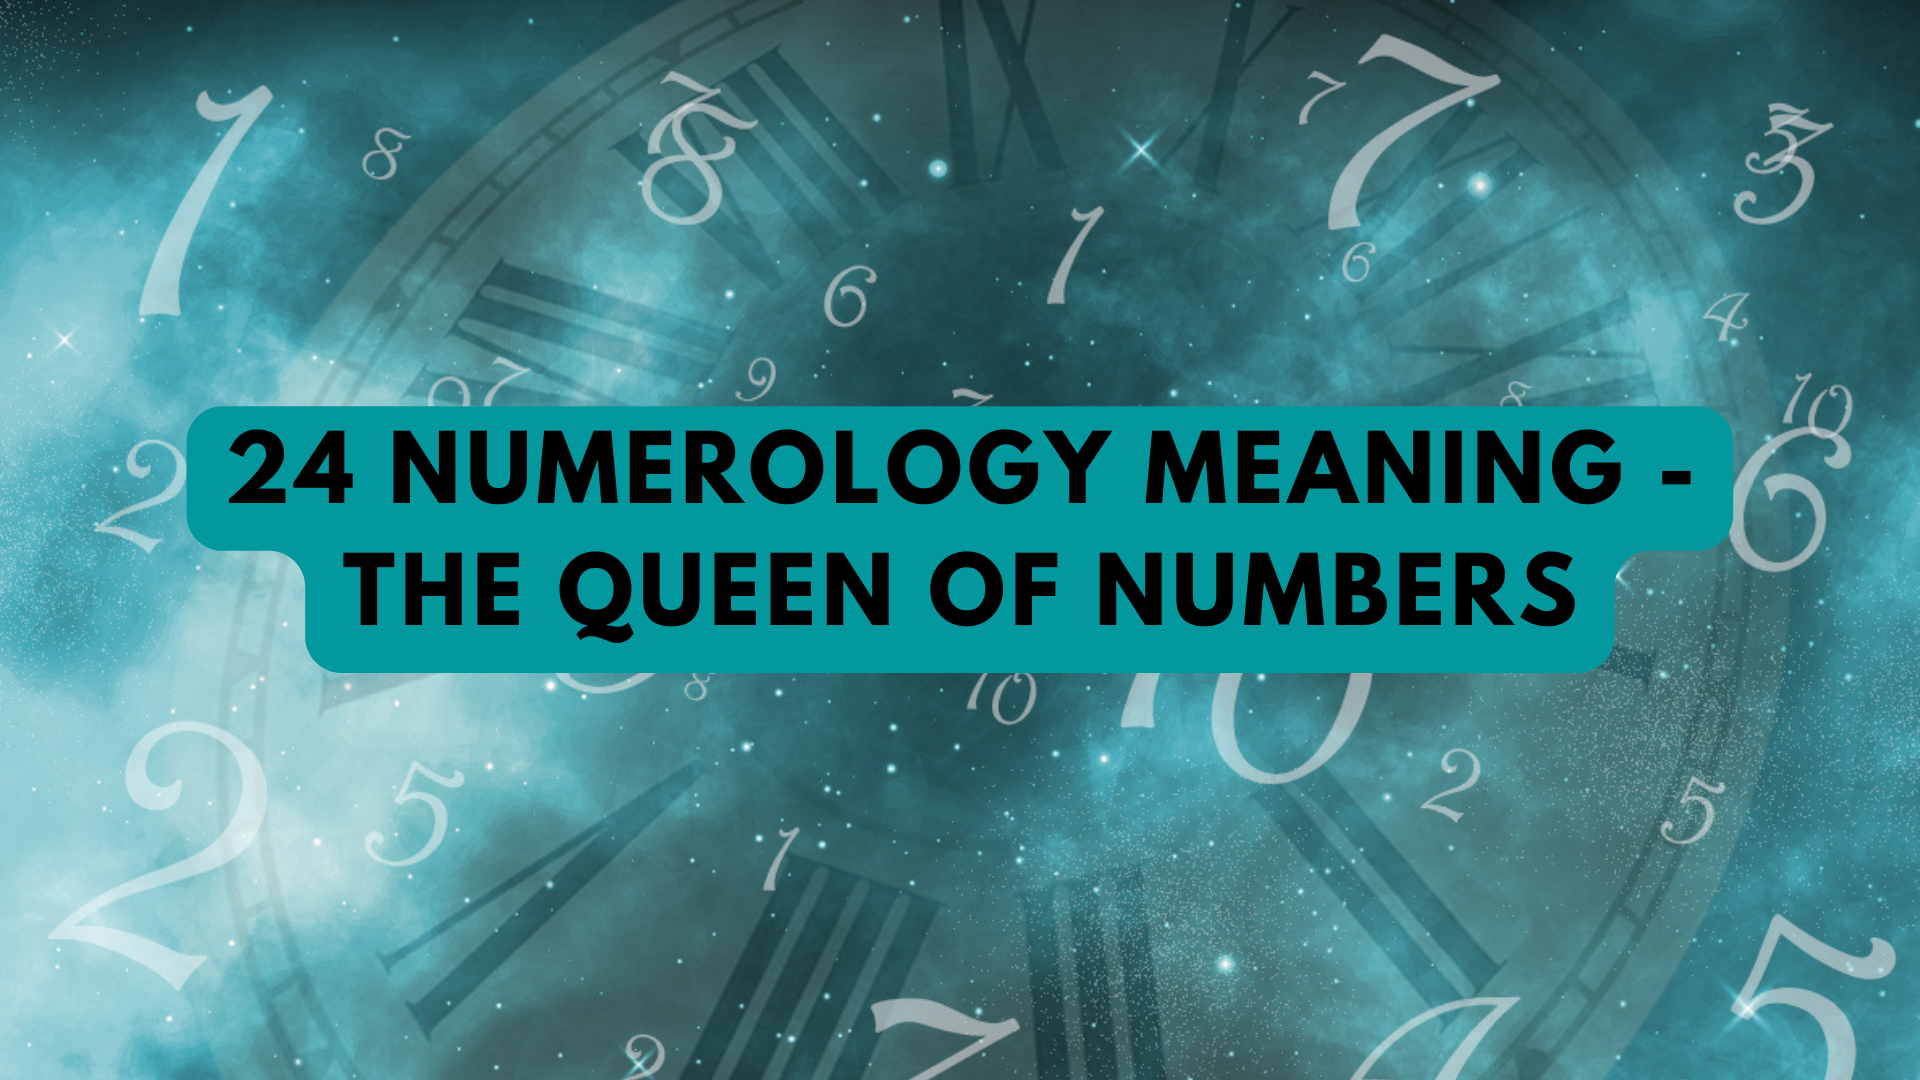 A clock and various numbers in the galaxy with words 24 Numerology Meaning The Queen Of Numbers